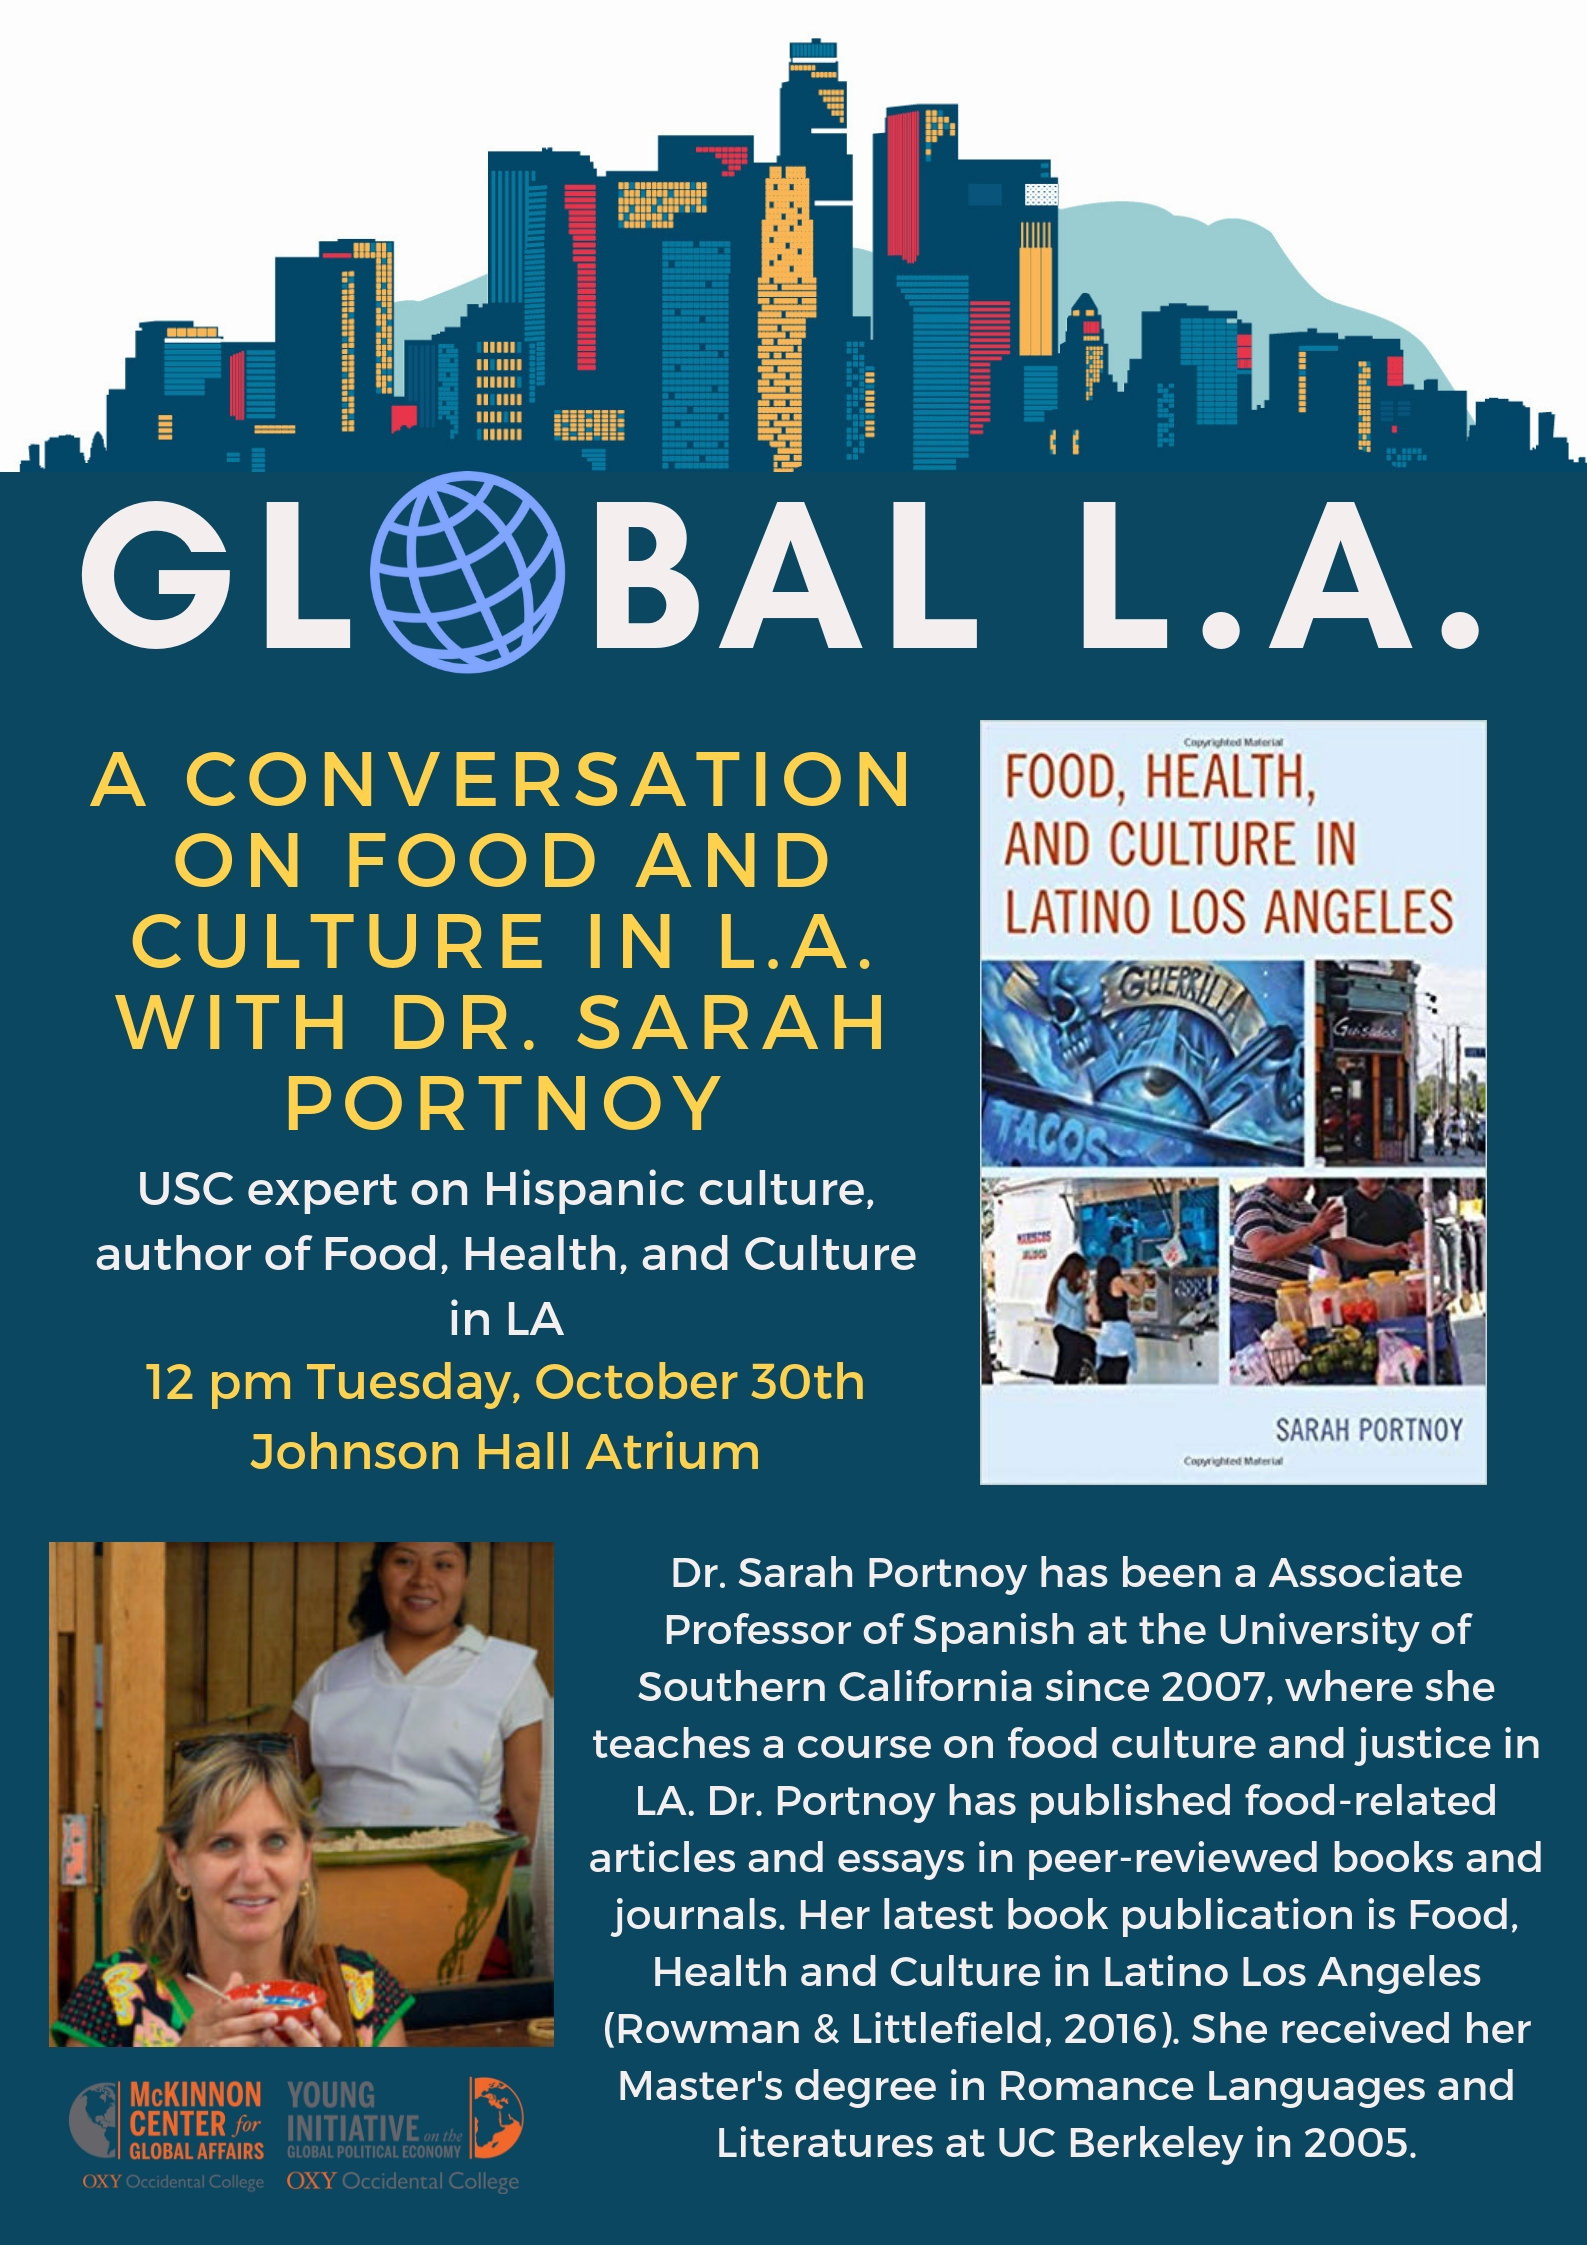 Image for Global L.A. Event